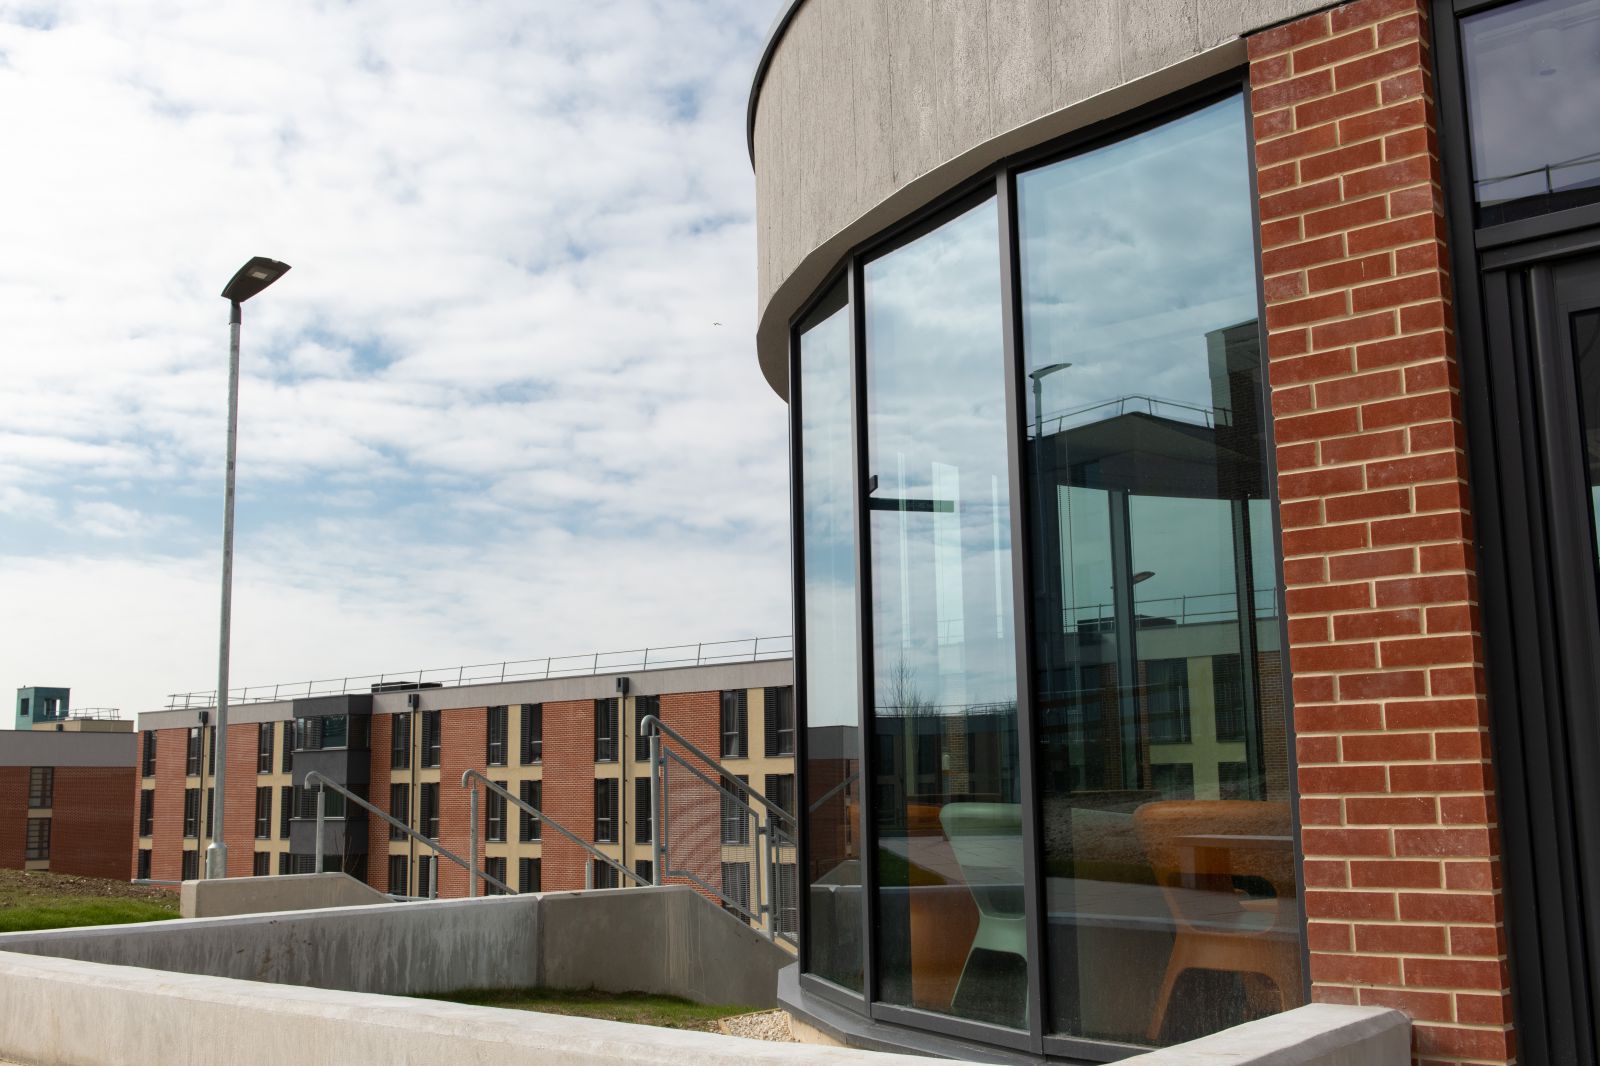 East Slope residences at the University of Sussex